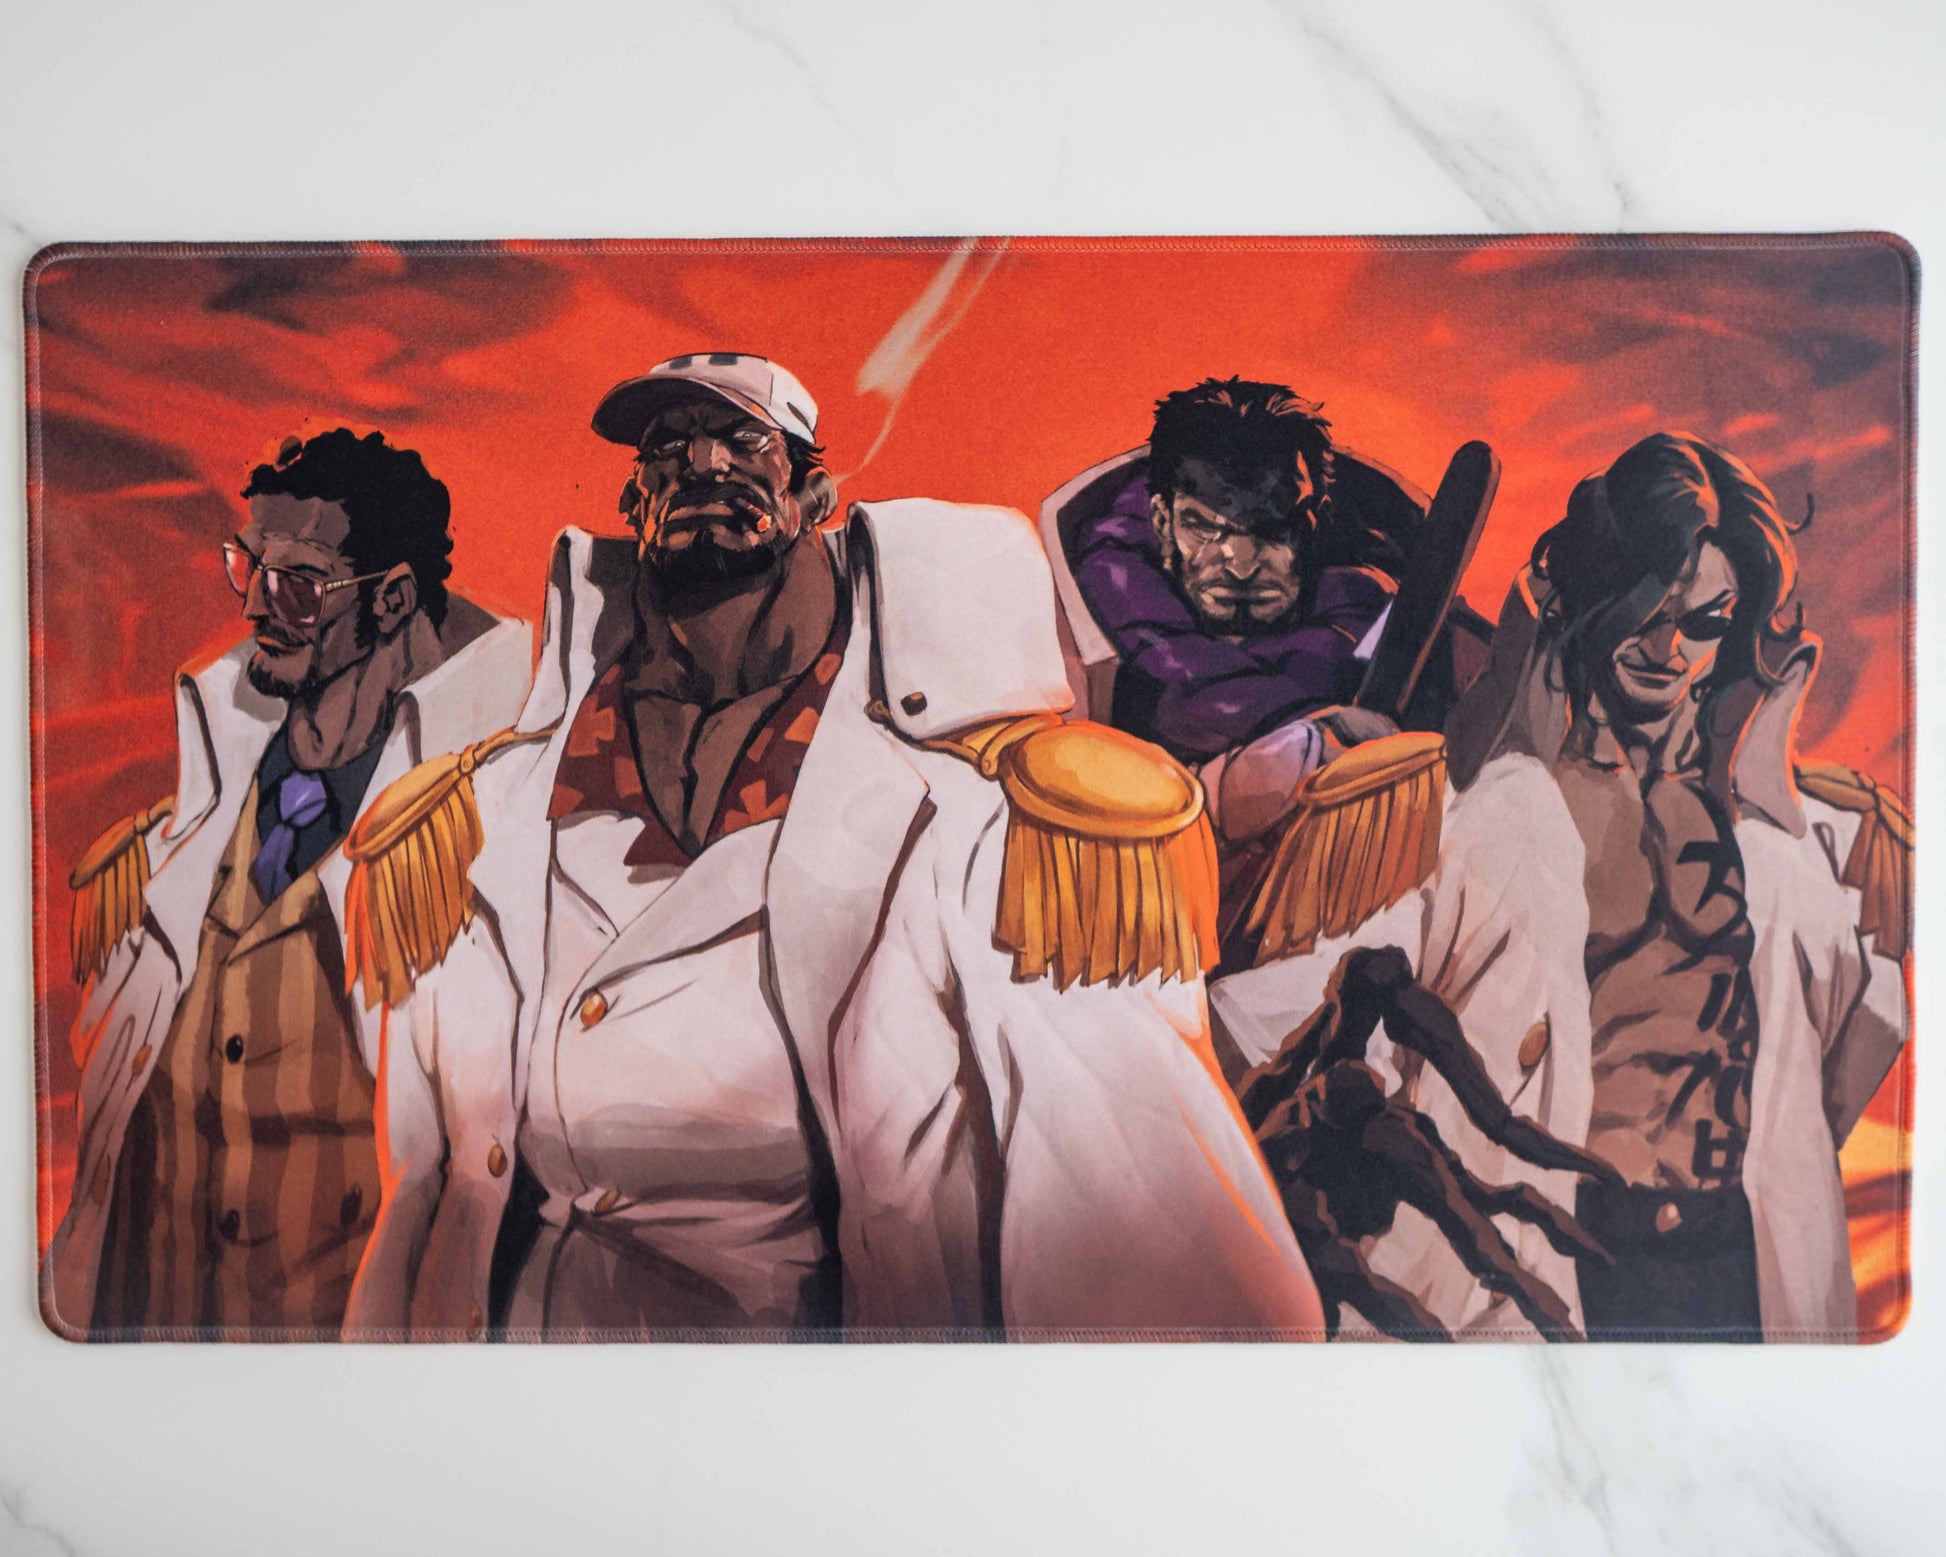 image of a playmat featured the fleet admiral and his three admirals